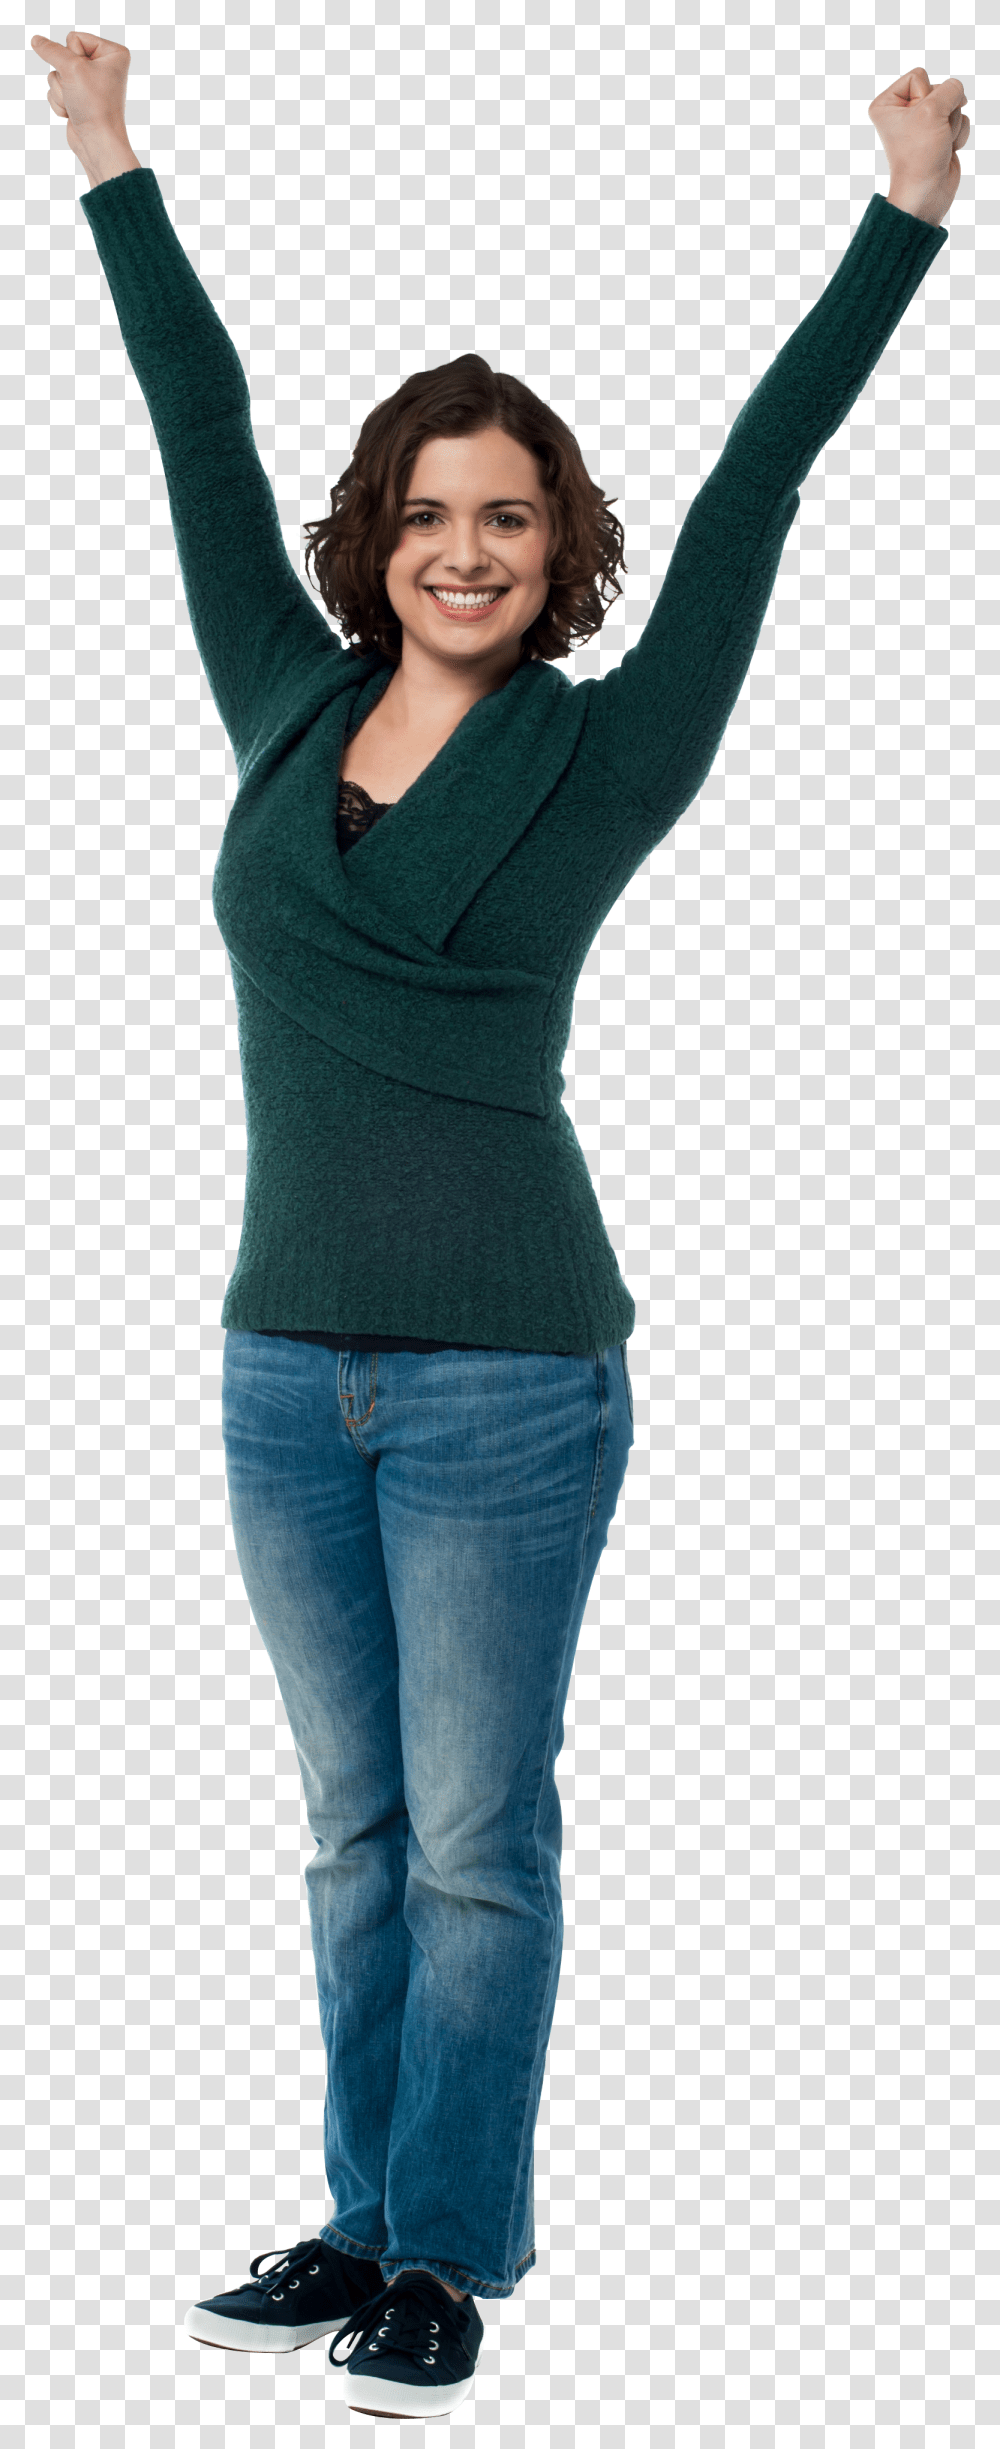 Happy Person Images Woman With Raised Arms, Apparel, Sleeve, Long Sleeve Transparent Png